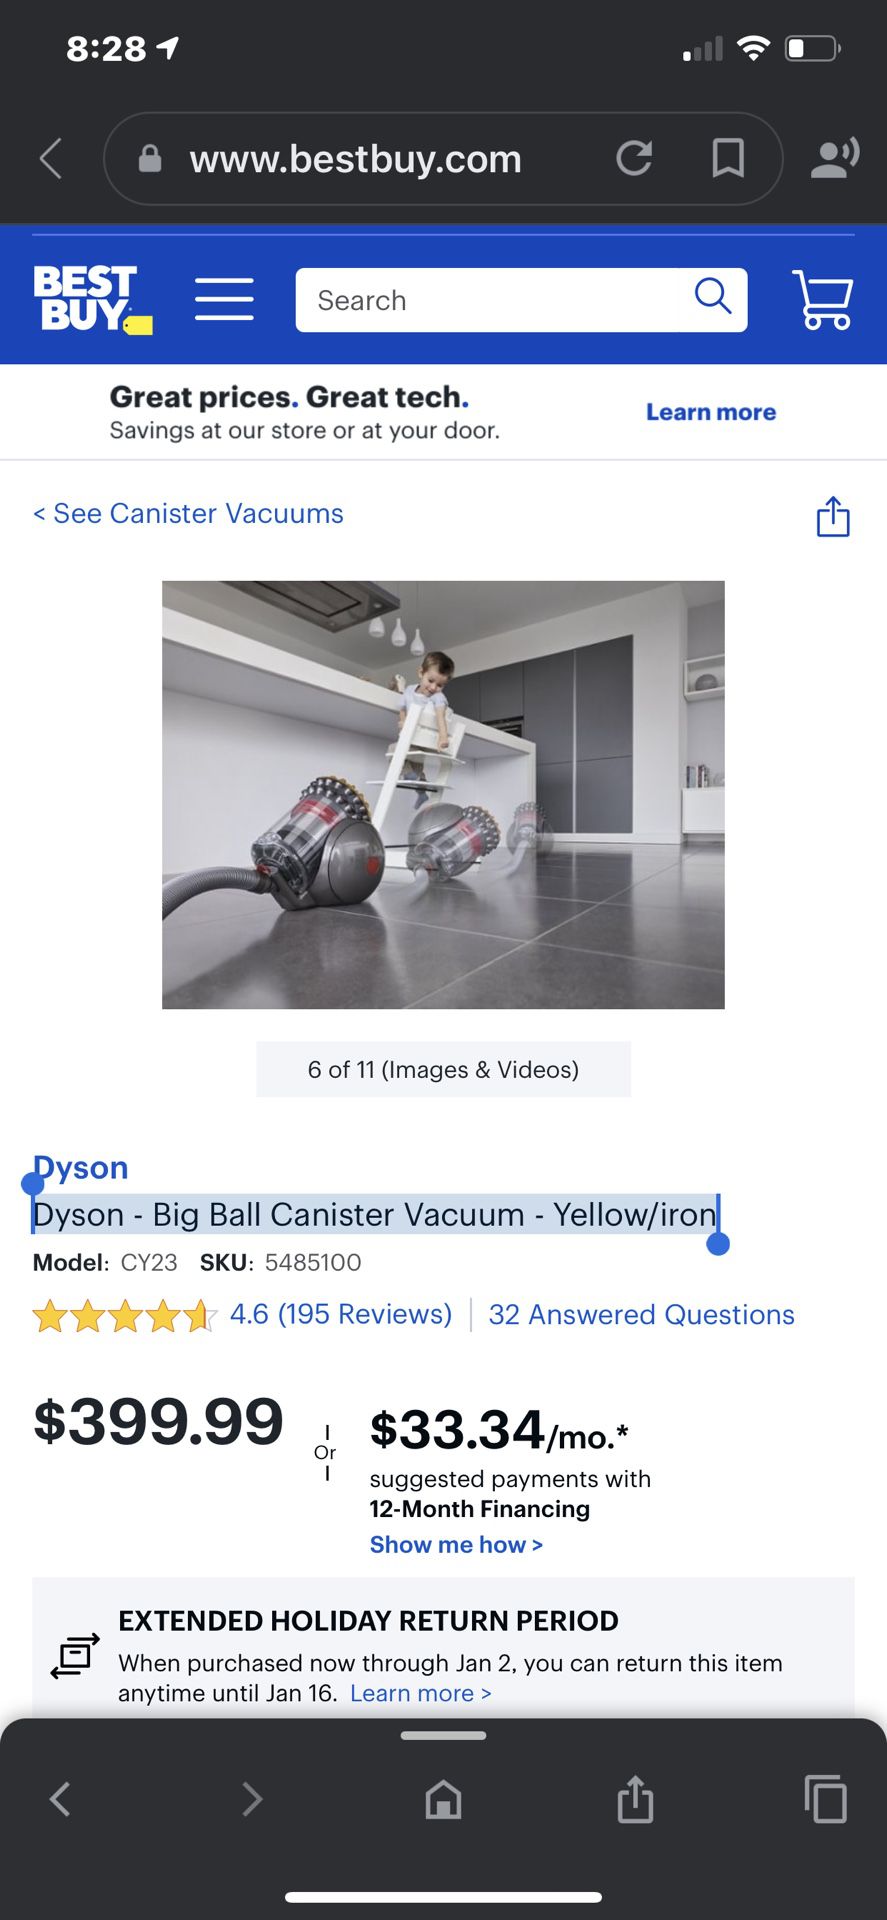 Dyson - Big Ball Canister Vacuum - Yellow/iron